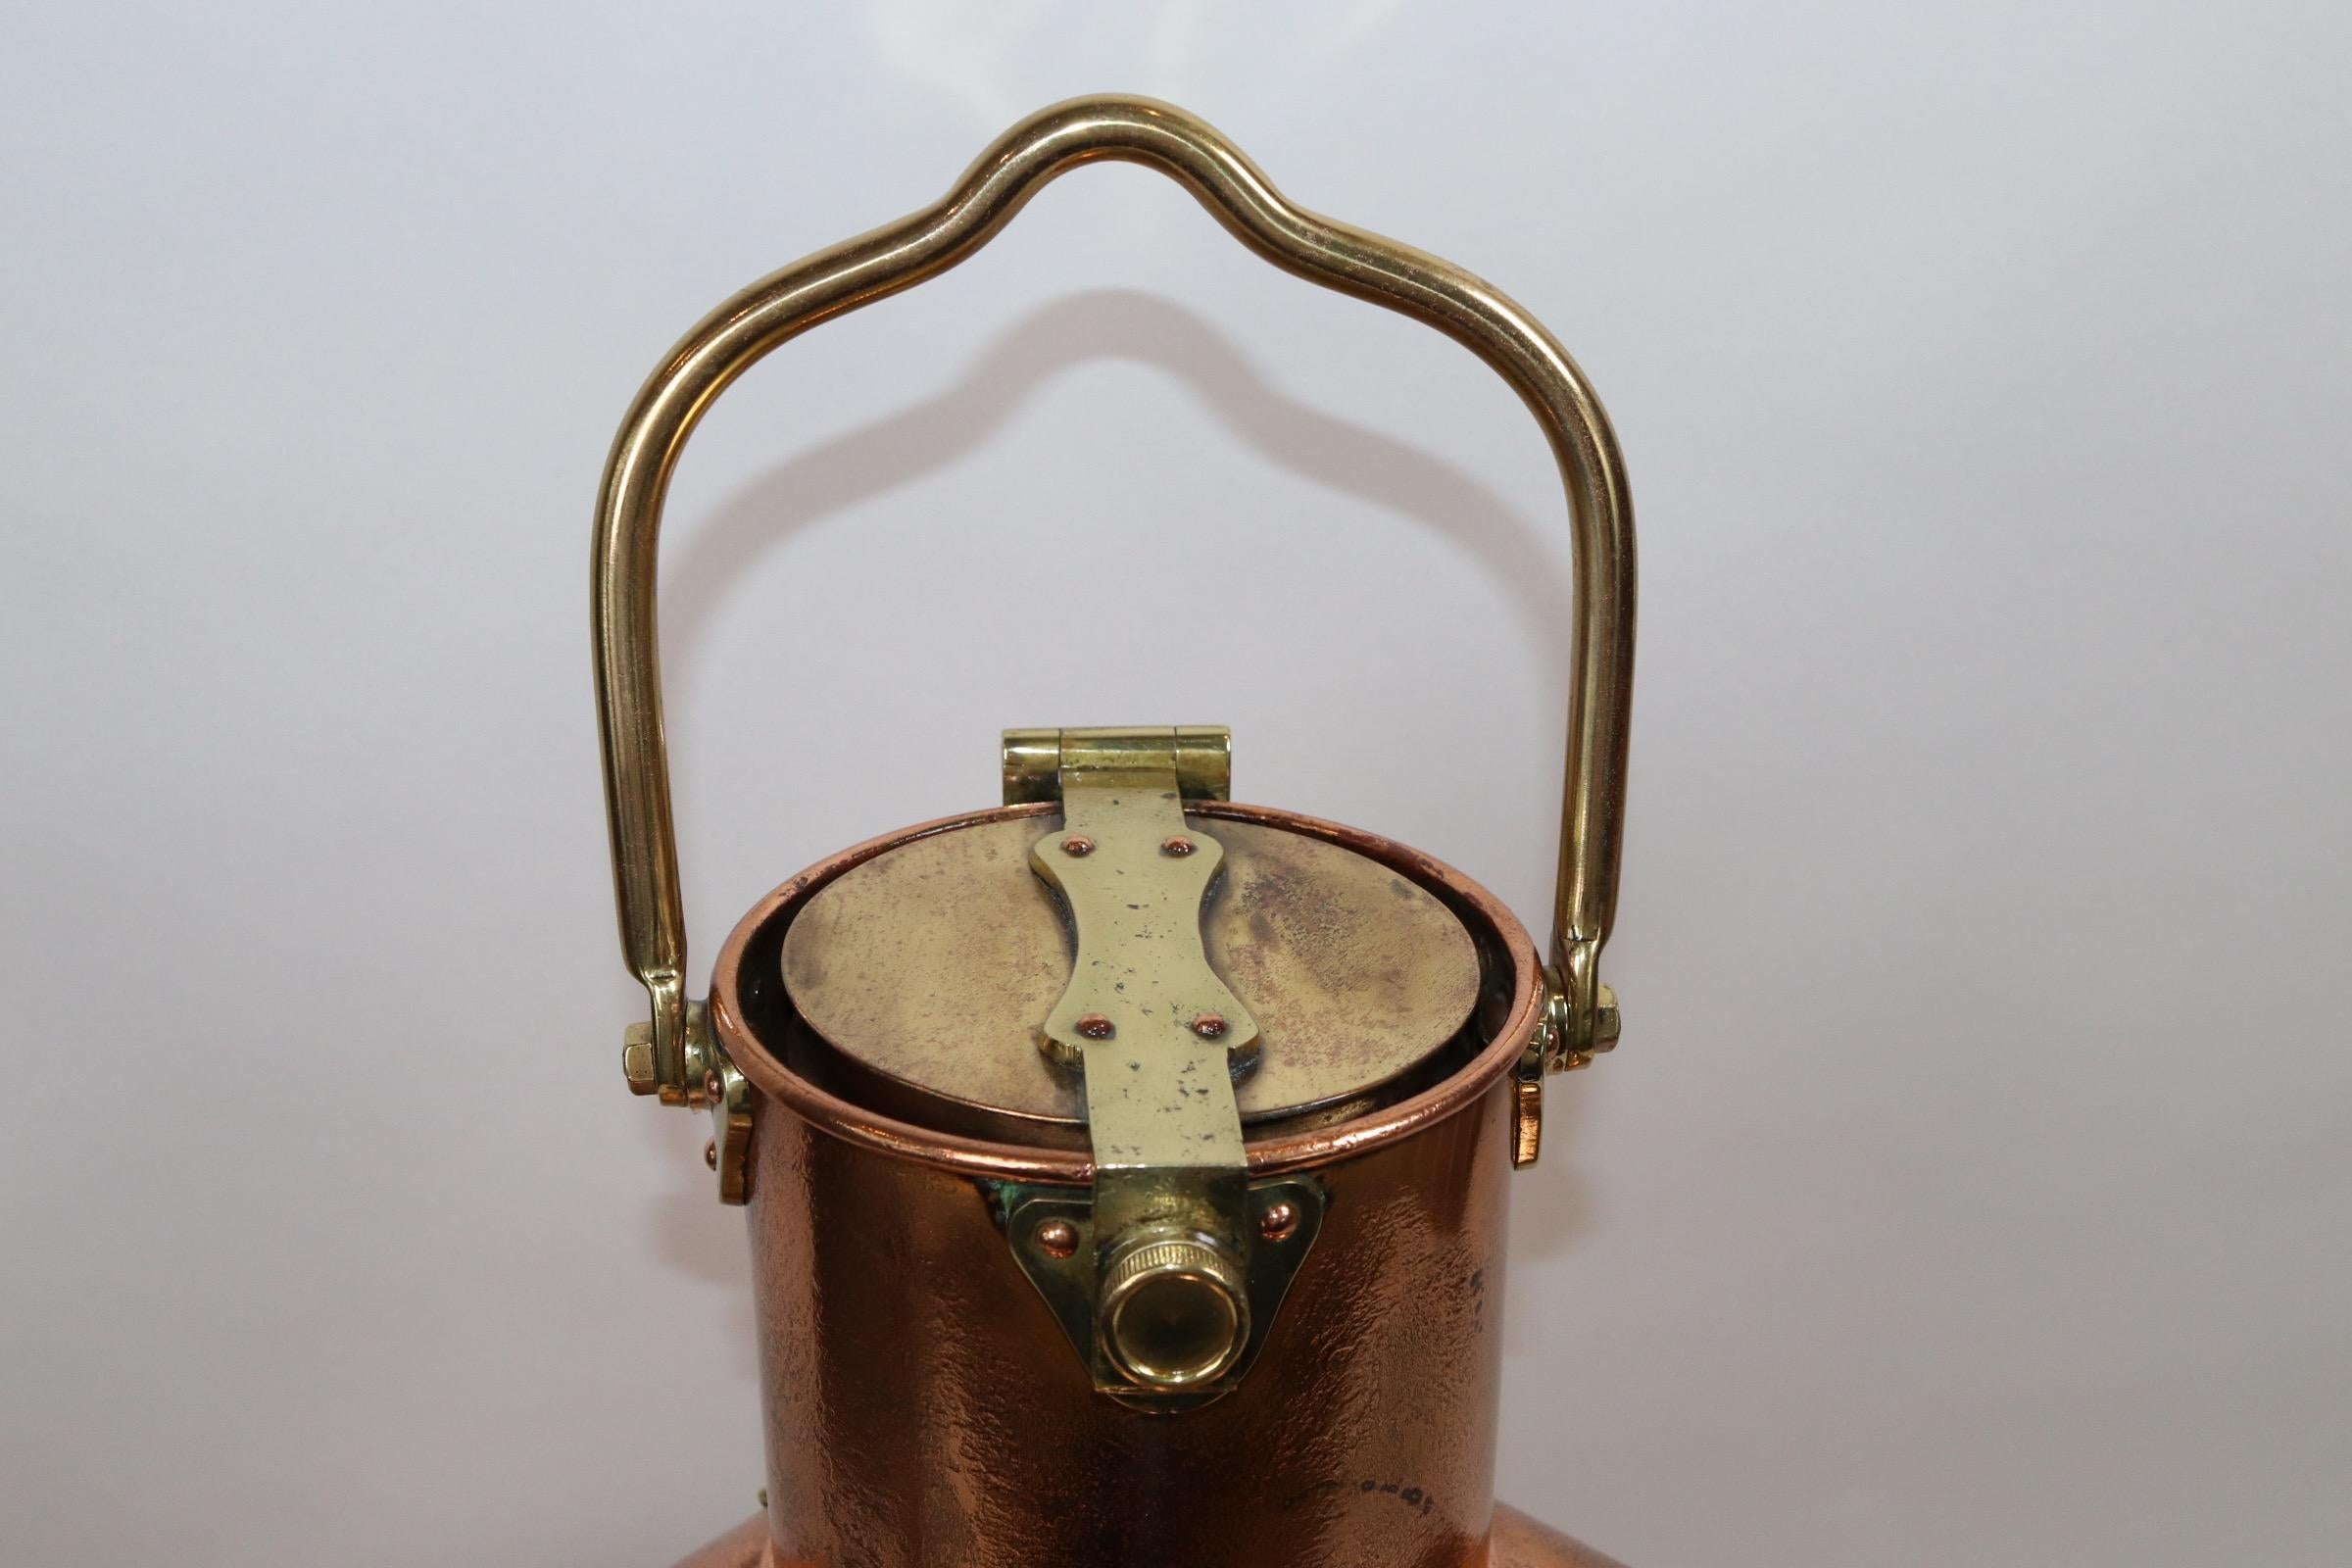 Very heavy authentic ships port side lantern from Tokyo Japan. With polished copper case, sturdy and thick brass trim, flanges, hinges and protective bars. The clear glass fresnel lens is backed with a sliding red filter. The lantern is topped with